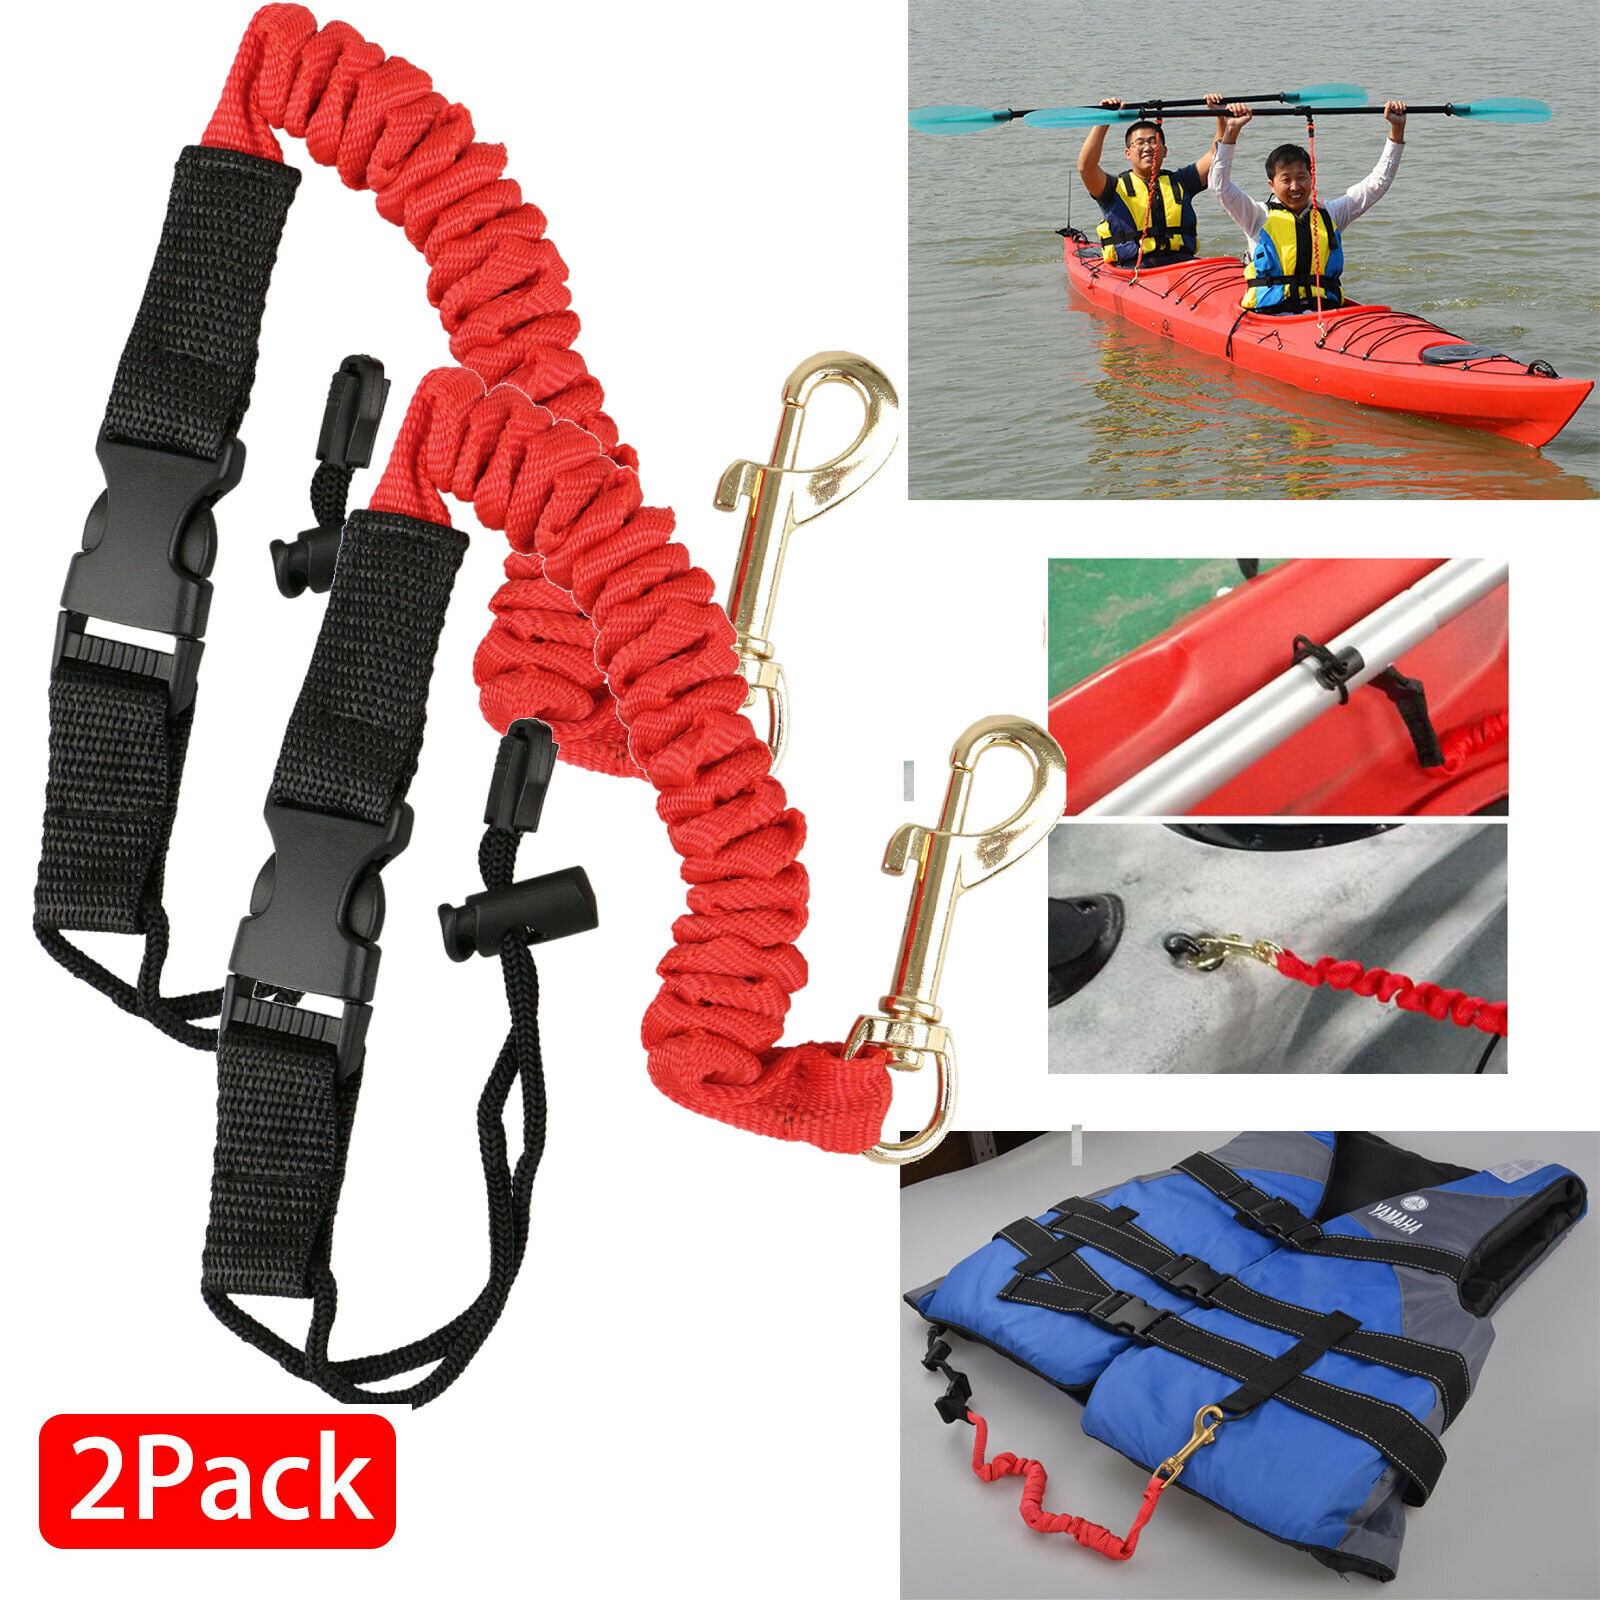 2 pack Kayak Paddle Fishing Leash Rope Rod Leash Safety Lanyard Boat Accessories